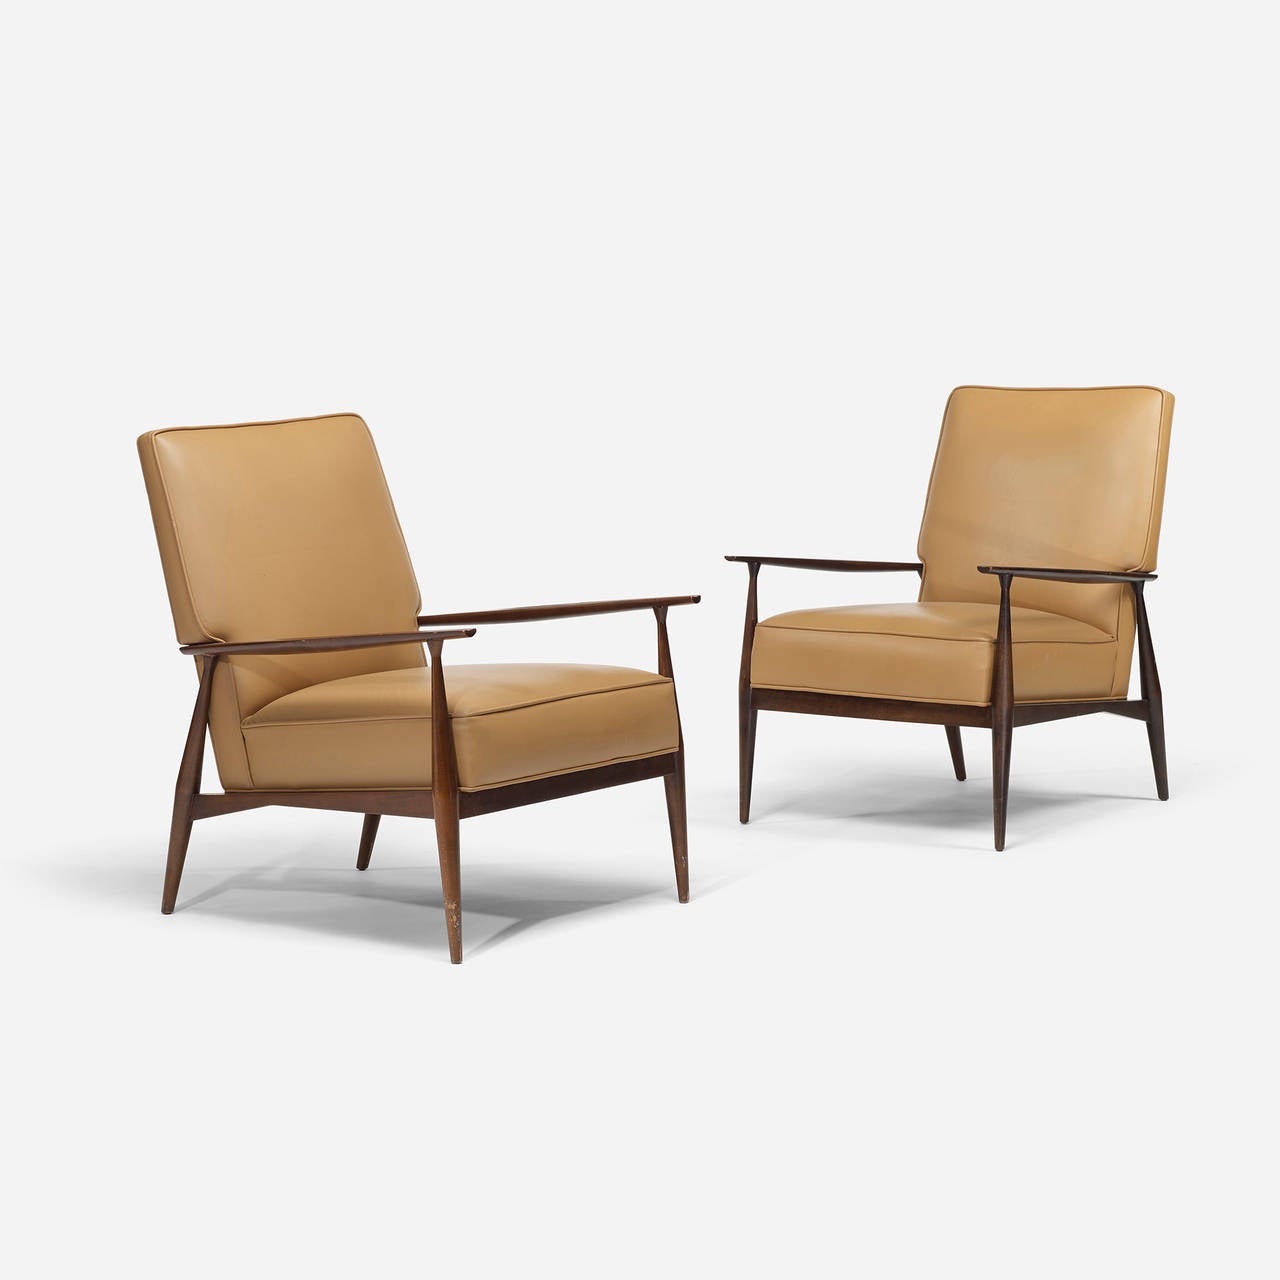 Pair of lounge chairs by Paul McCobb for Directional.